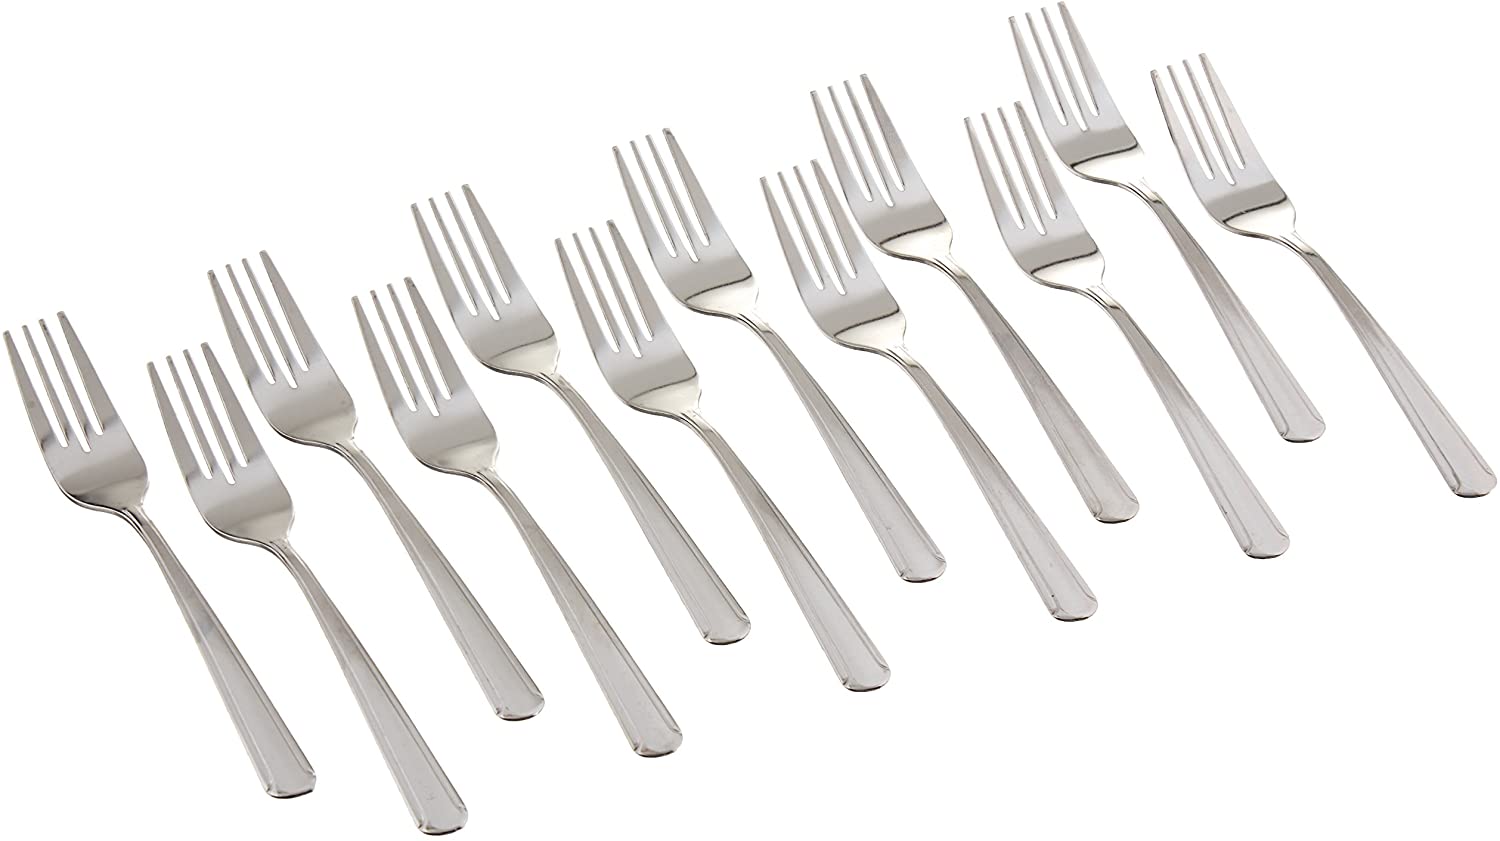 Winco Dominion Etched Salad Fork, 12-Piece